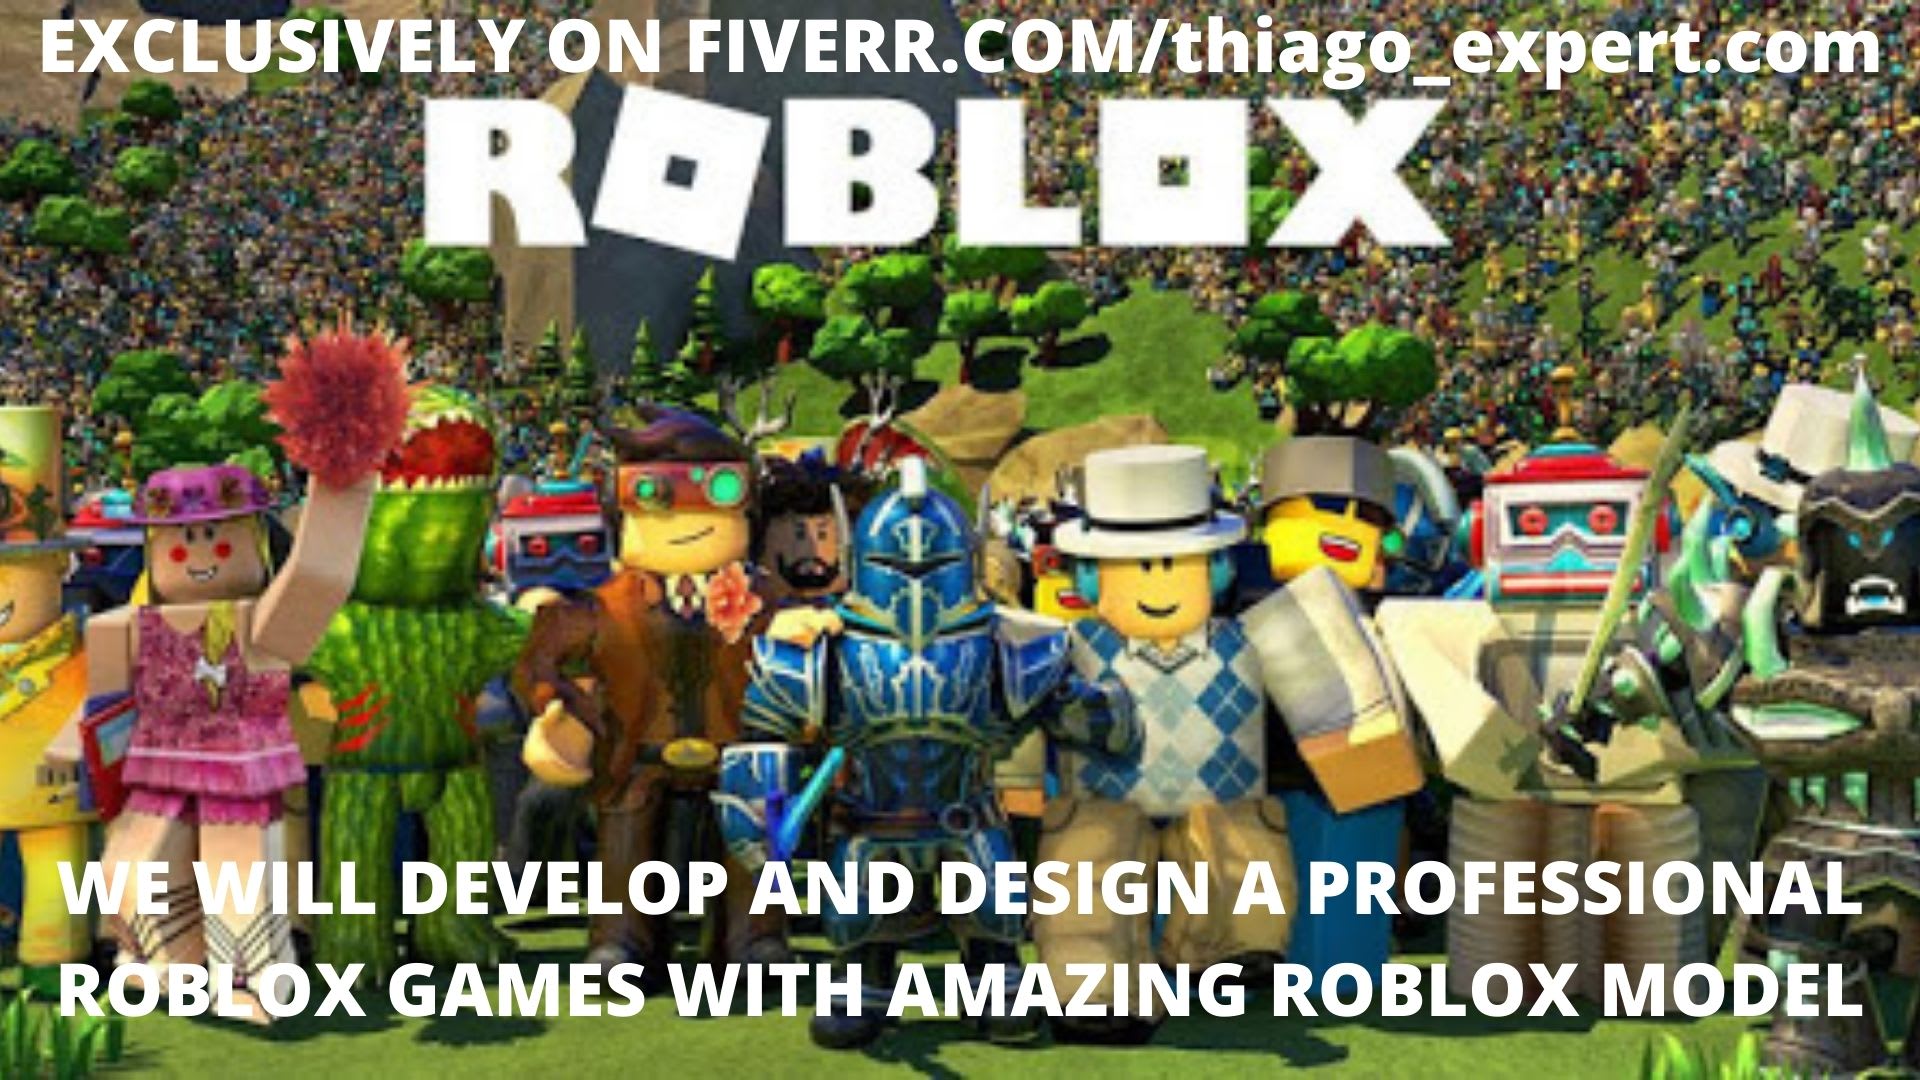 Build A Profitable Roblox Unity Game With Amazing Models For Your Game By Thiago Expert Fiverr - roblox game maker profit